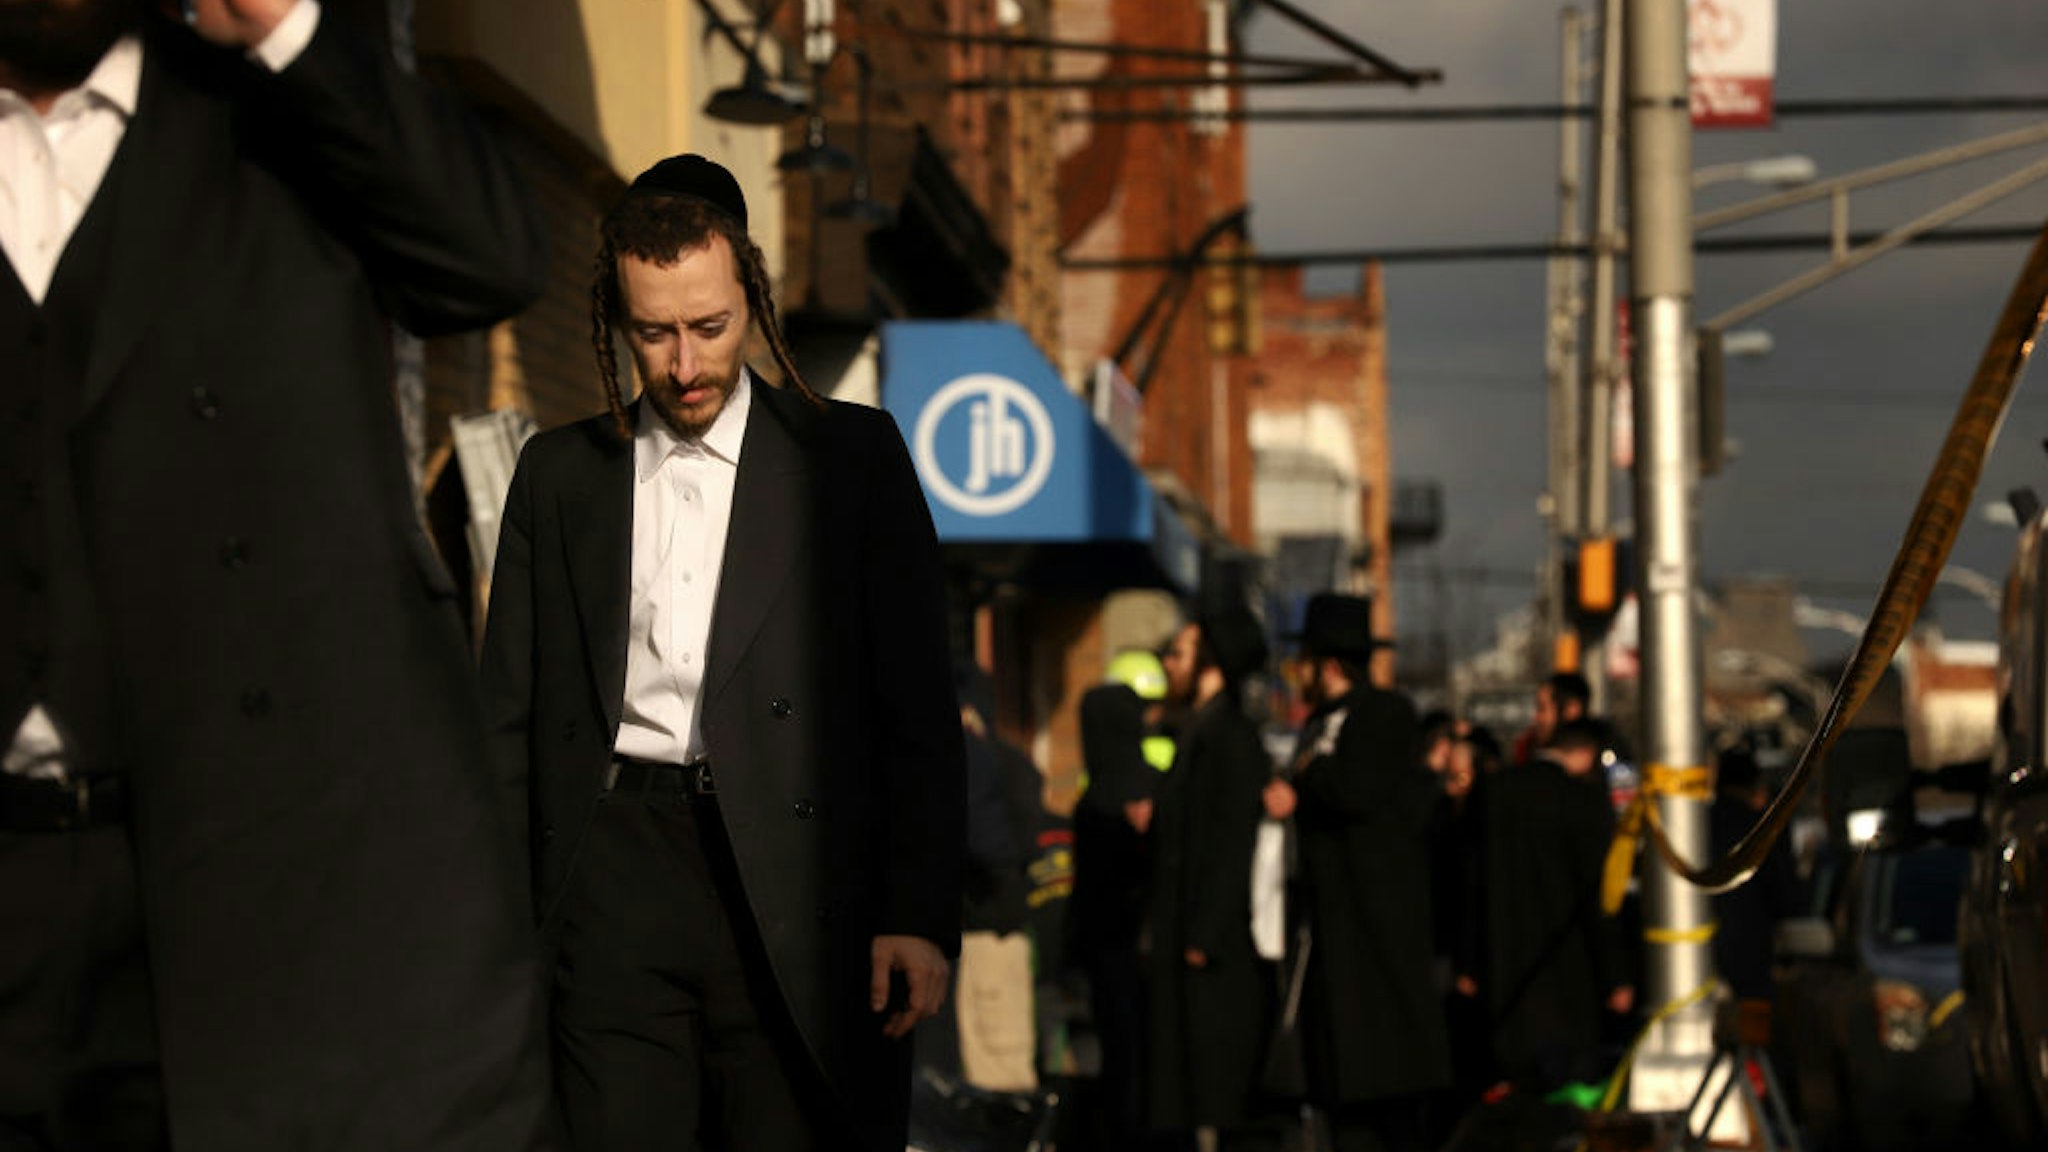 Members of the Jewish community gather around the JC Kosher Supermarket on December 11, 2019 in Jersey City, New Jersey.